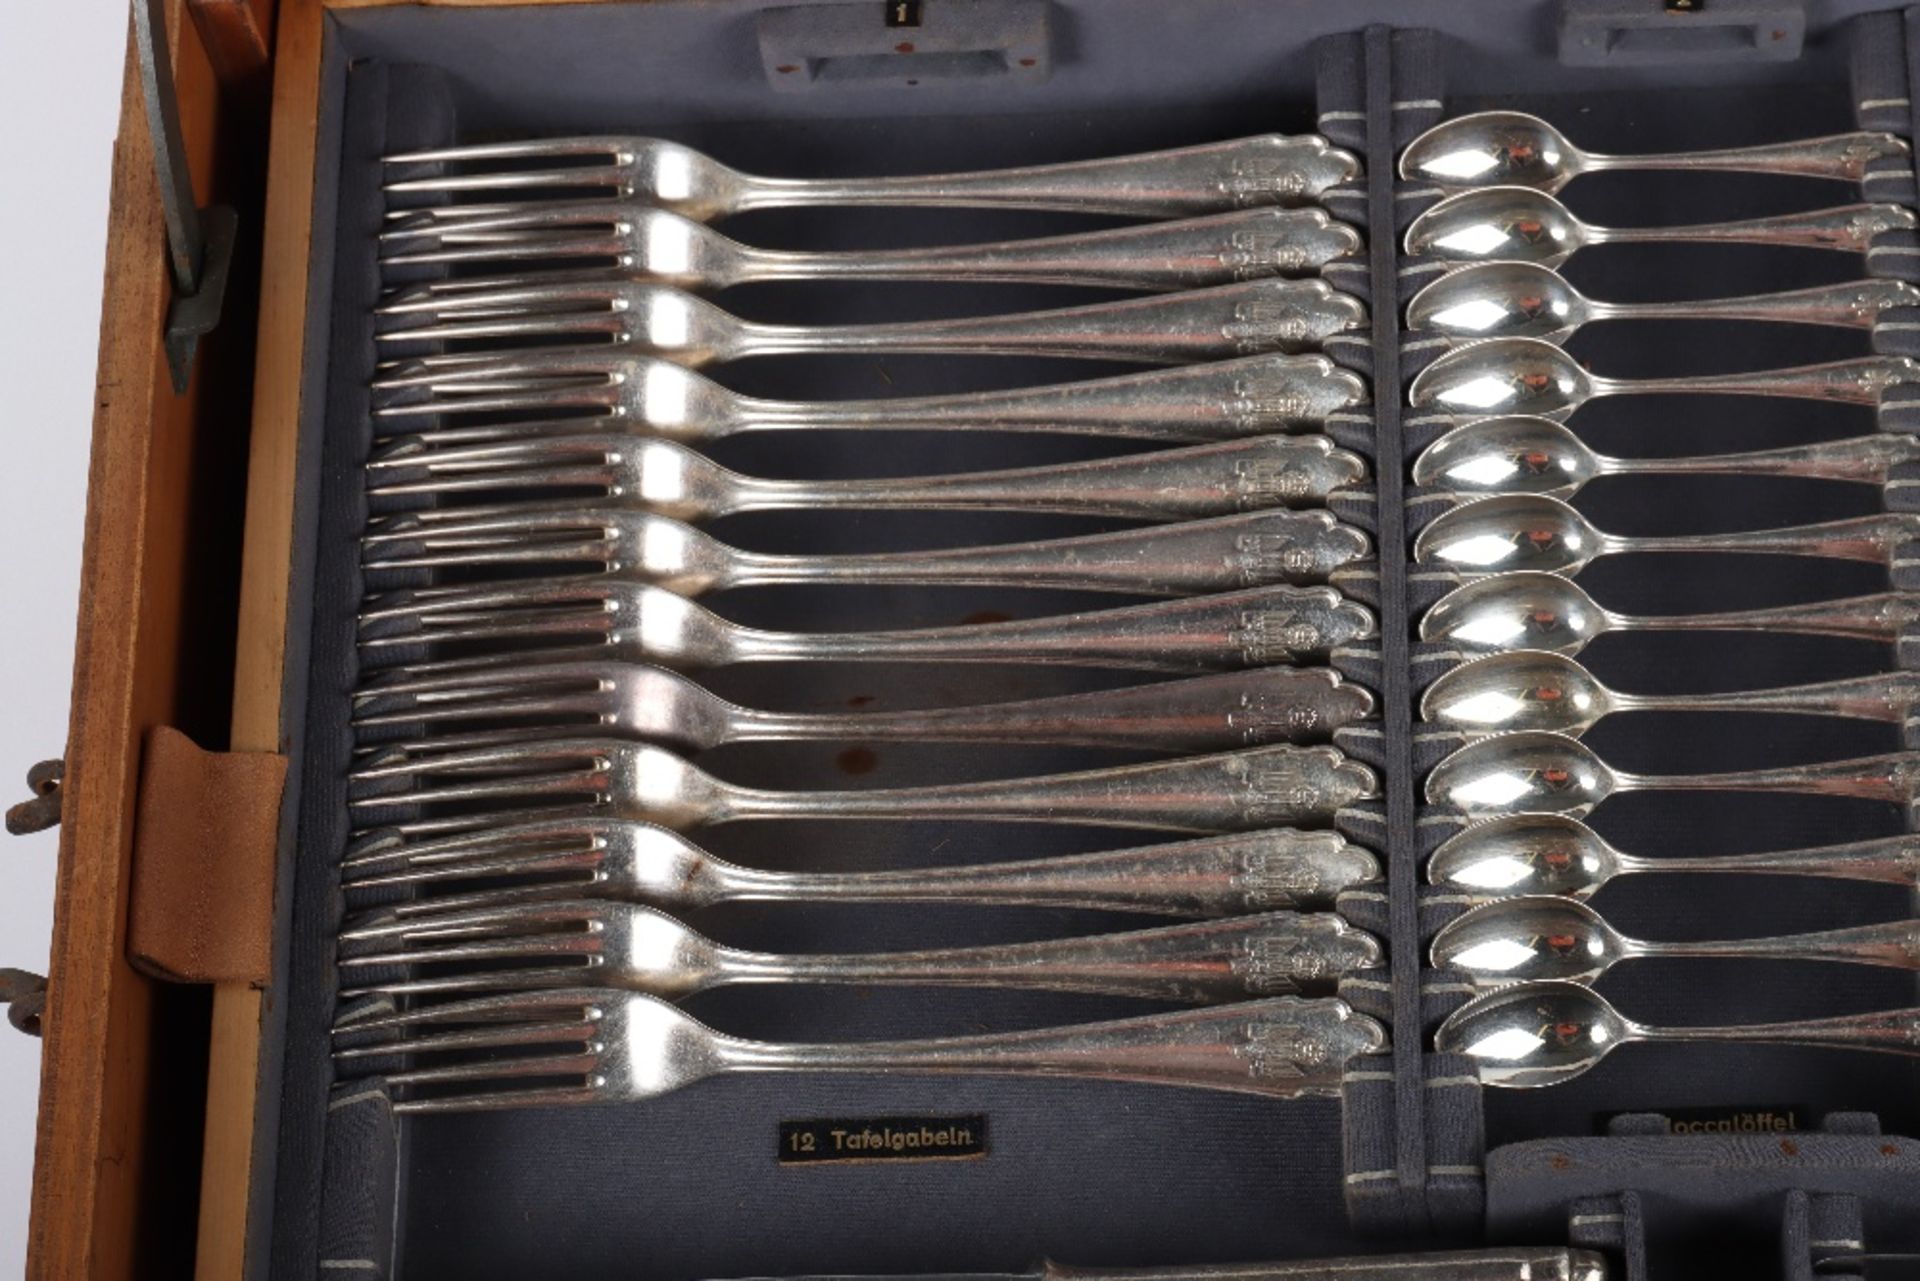 Cased Canteen of Formal Pattern NSDAP Cutlery Liberated From German Embassy in Spain - Image 13 of 34